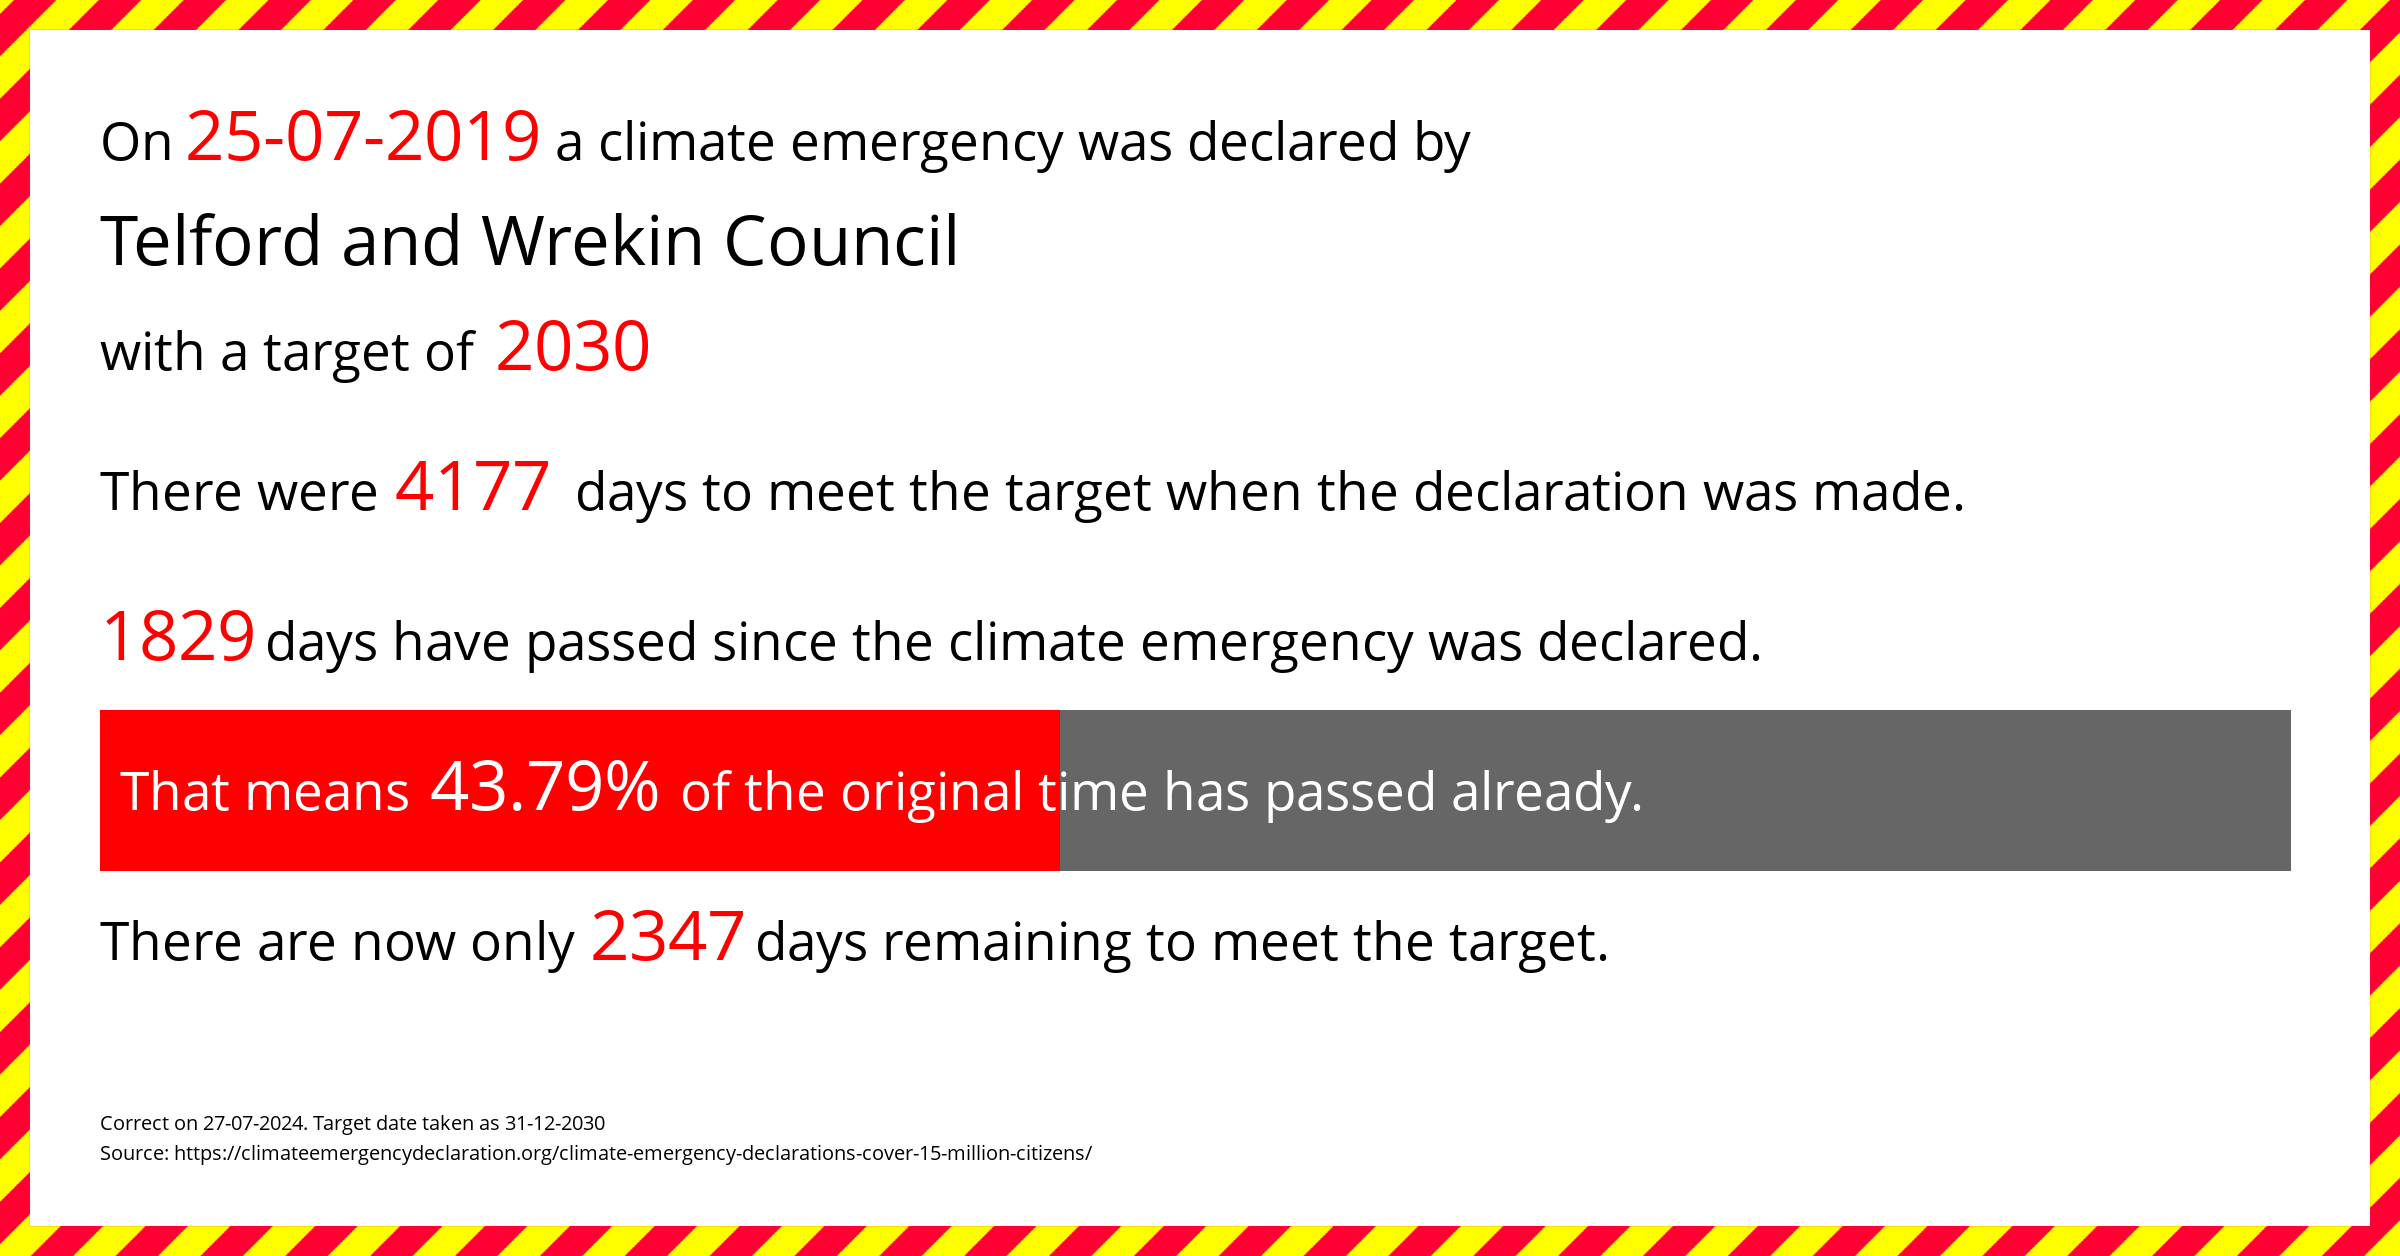 Telford and Wrekin Council declared a Climate emergency on Thursday 25th July 2019, with a target of 2030.